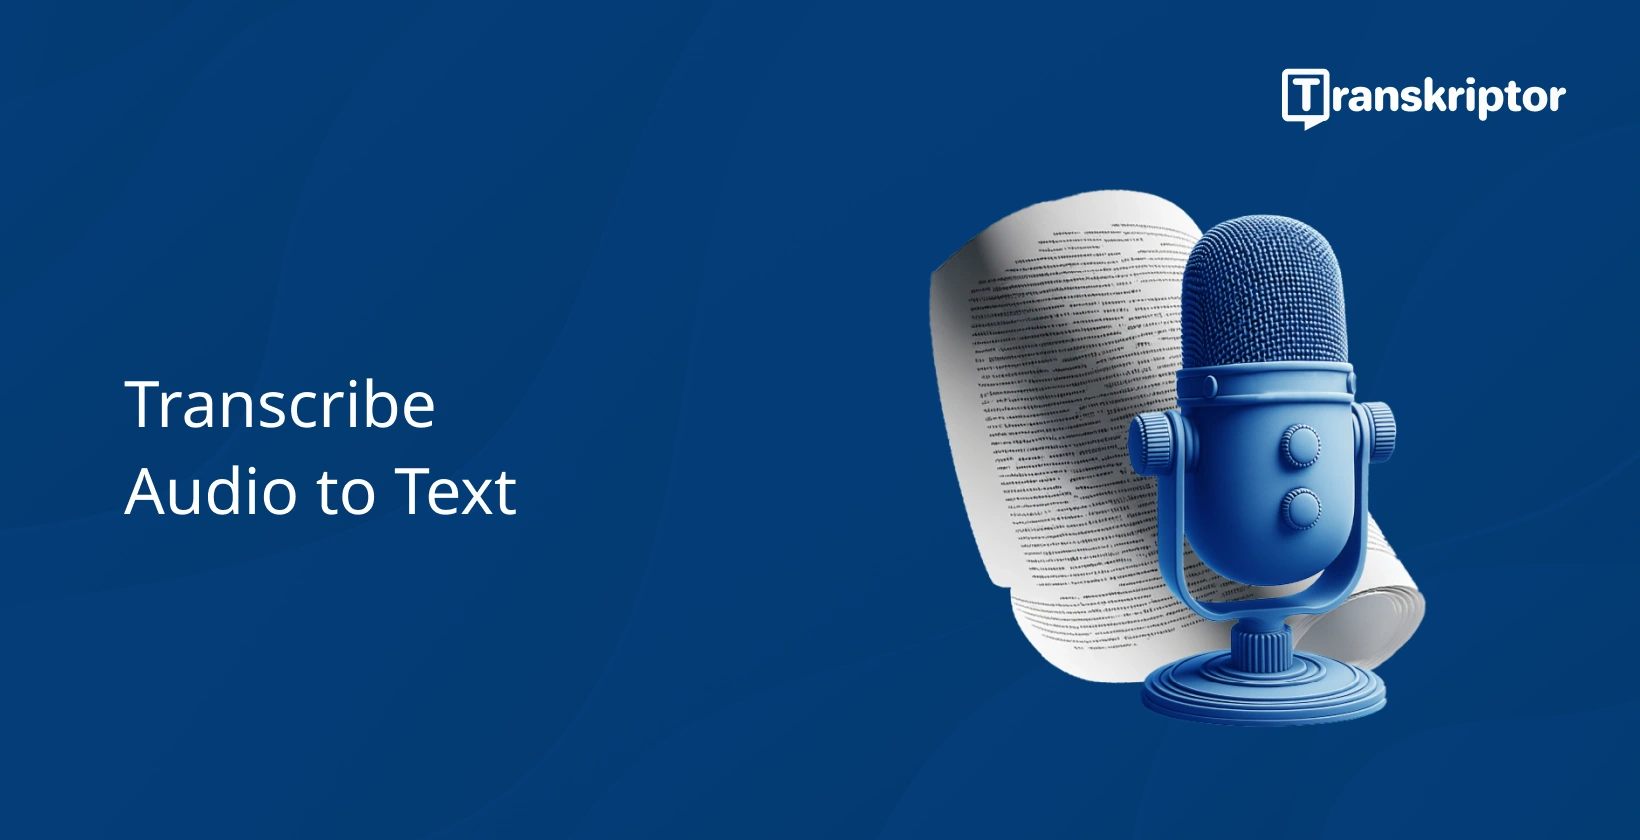 Transcribe audio to text depicted by a blue microphone and text document.